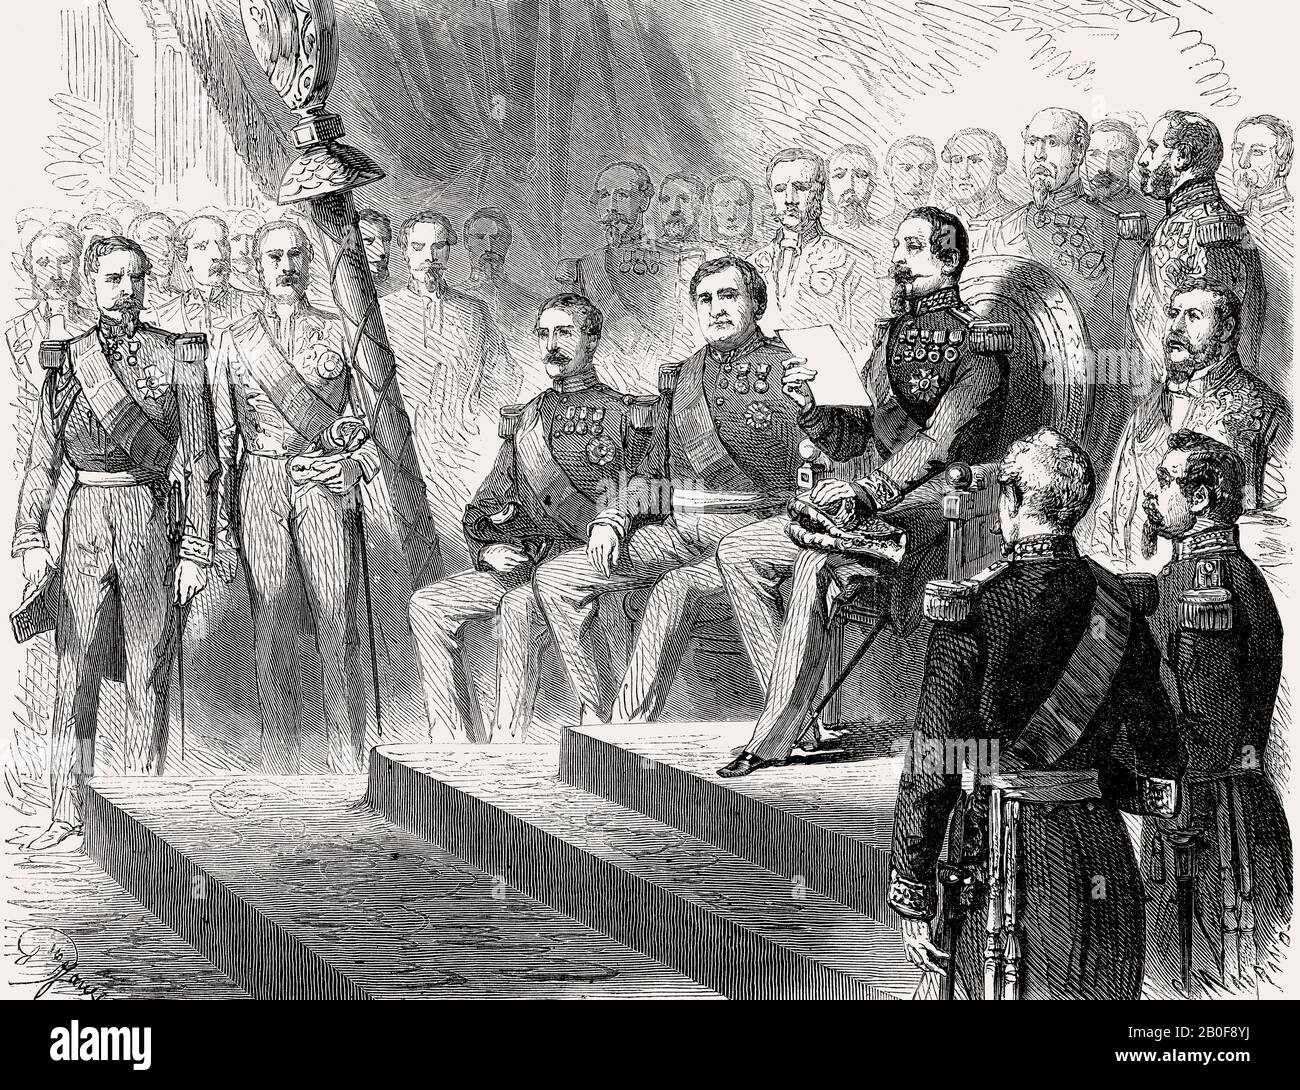 Chamber of Deputies, opening of the legislative session by Louis-Napoléon Bonaparte, Napoleon III, Second French Empire, 1863 Stock Photo